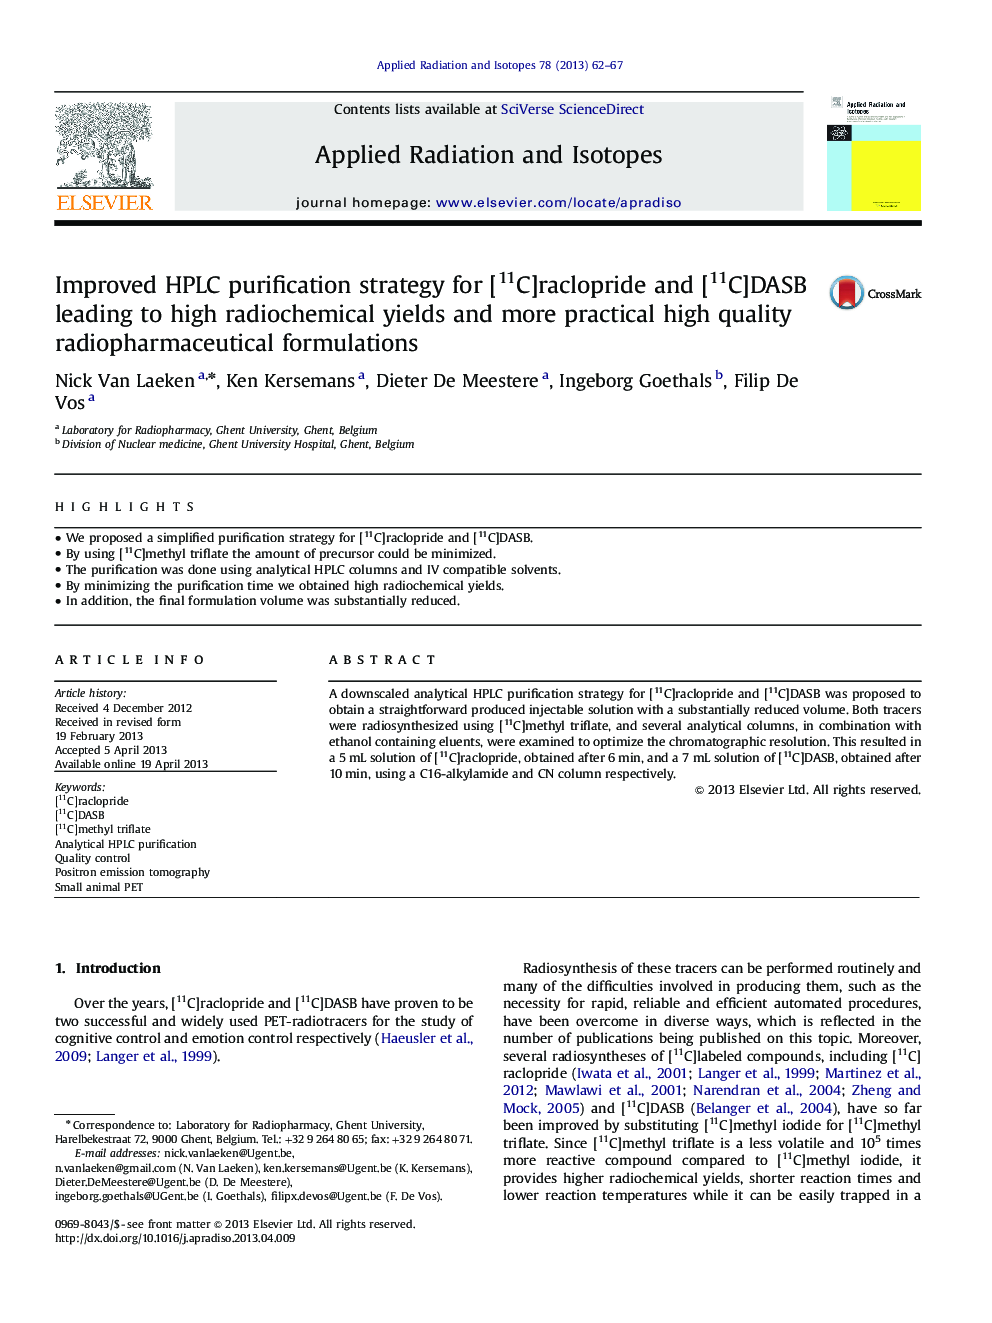 Improved HPLC purification strategy for [11C]raclopride and [11C]DASB leading to high radiochemical yields and more practical high quality radiopharmaceutical formulations